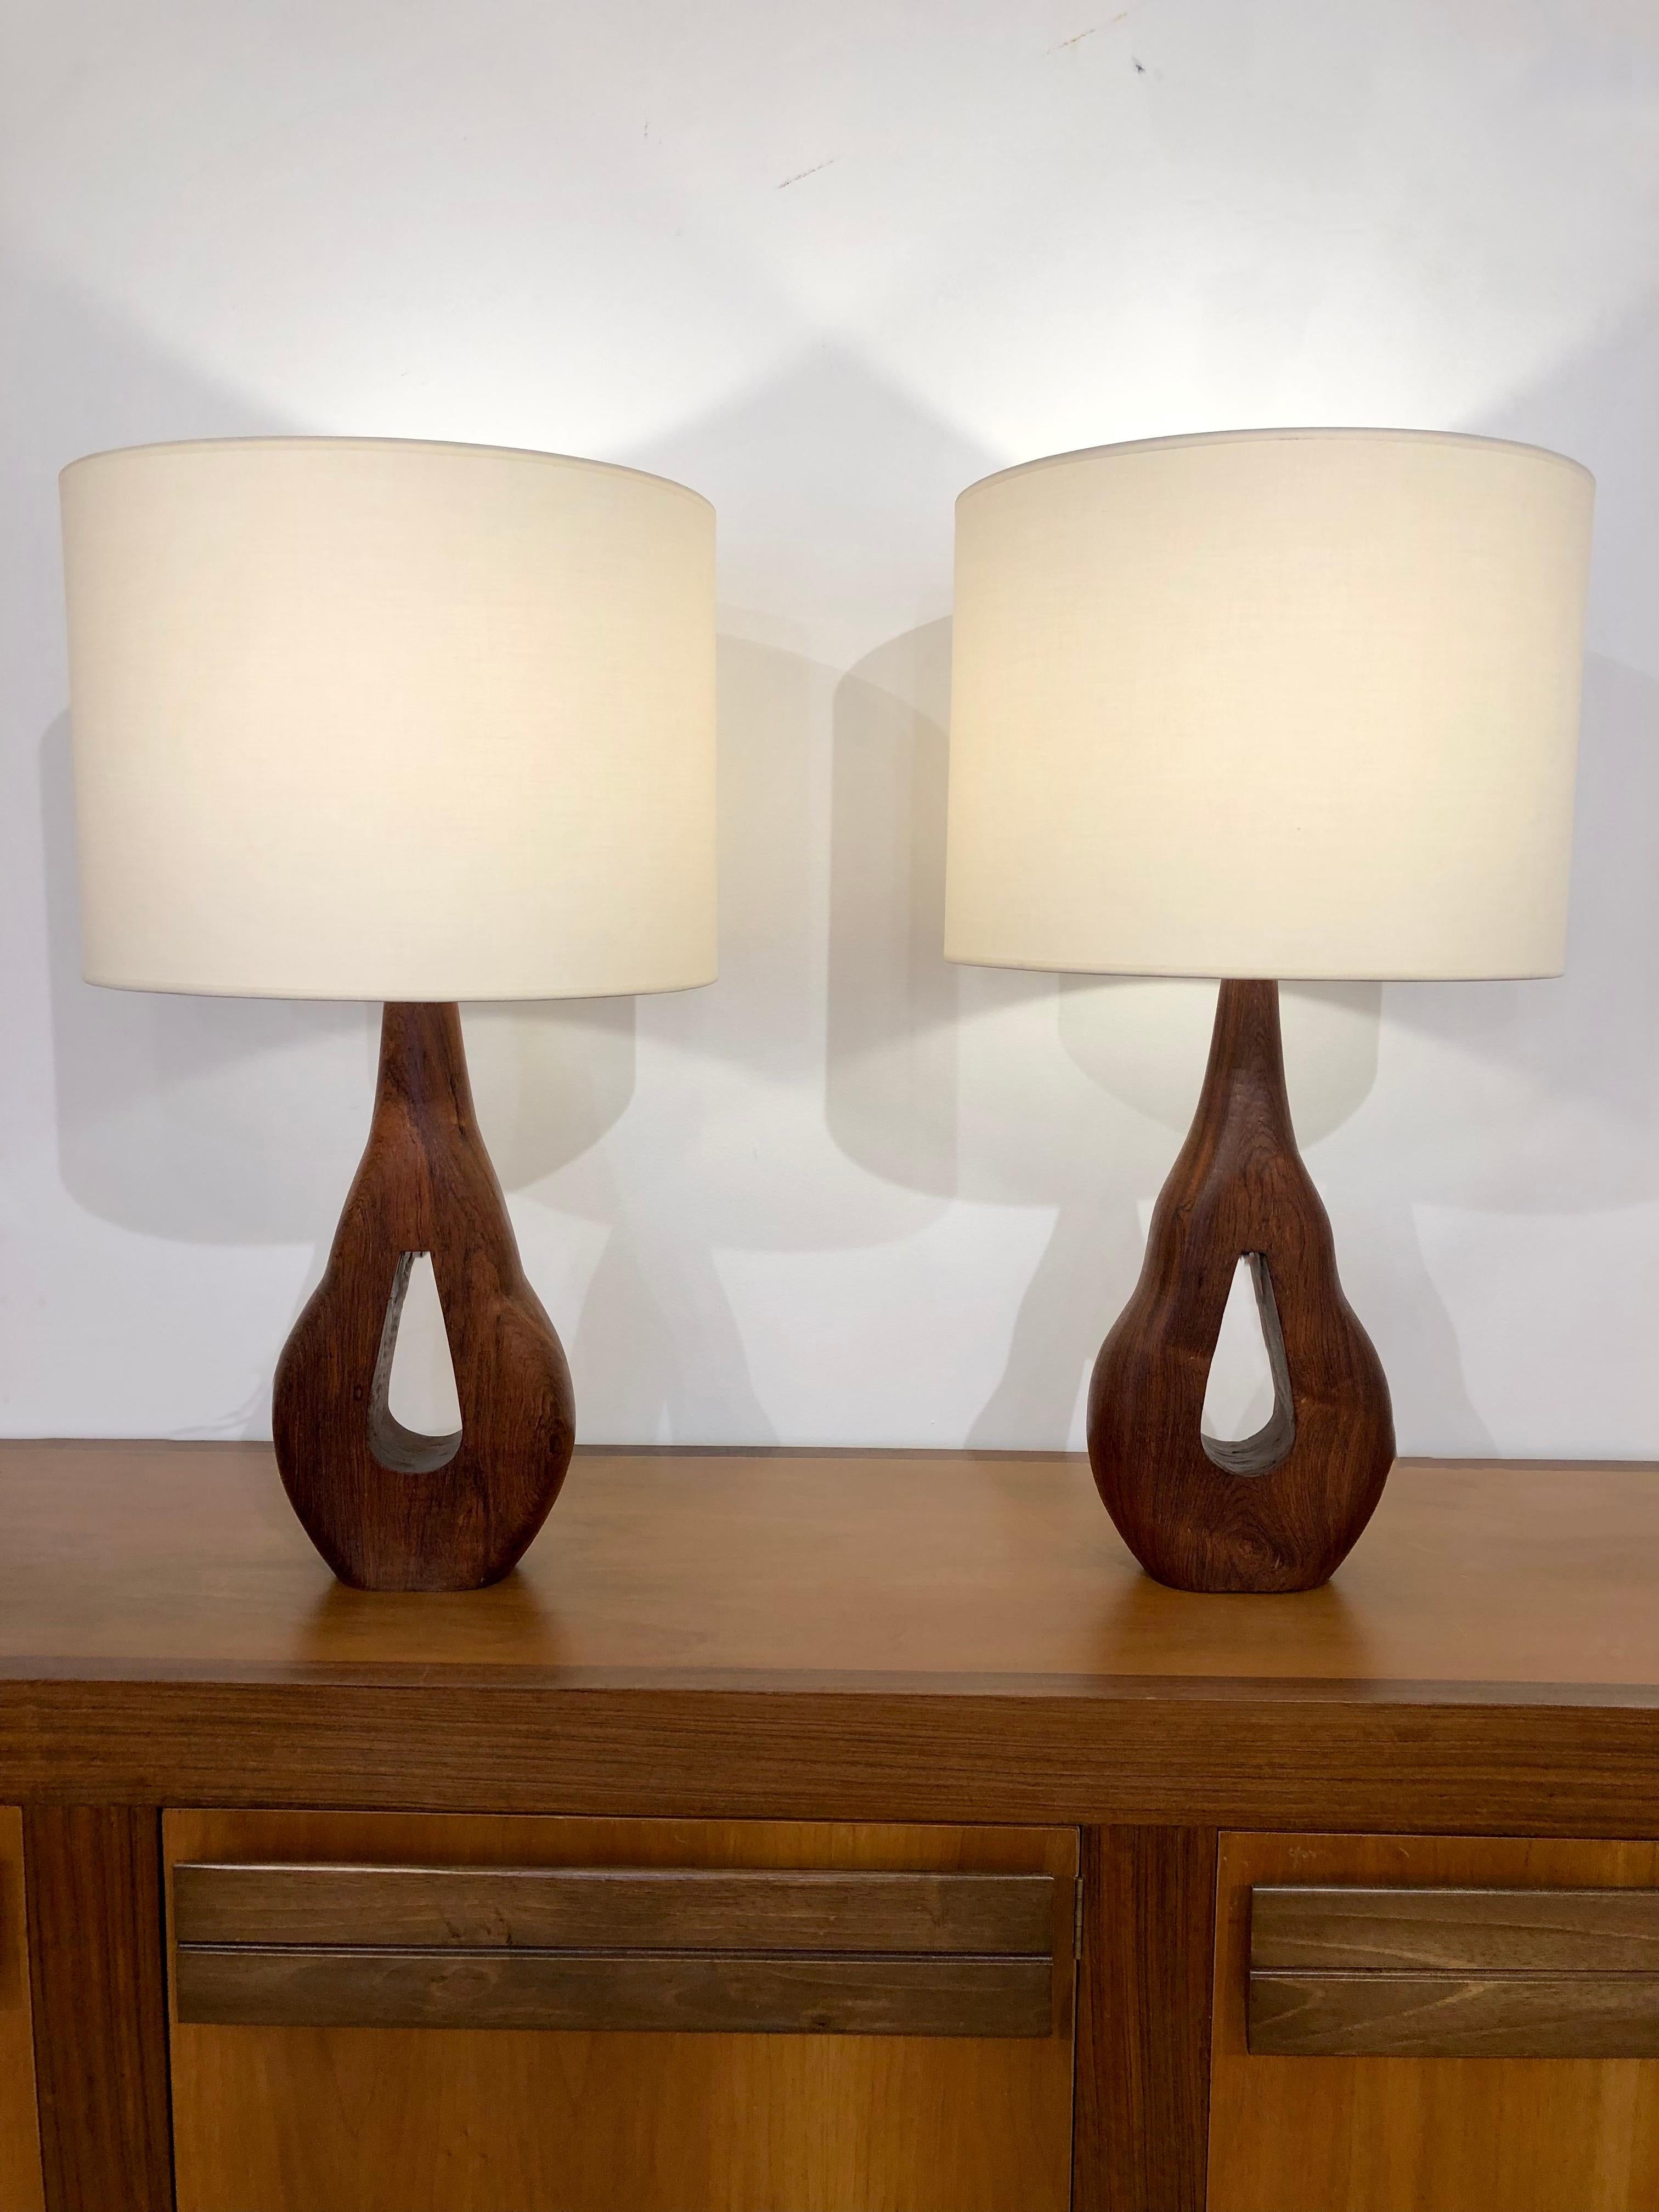 Pair of rosewood lamps 
From 1960.